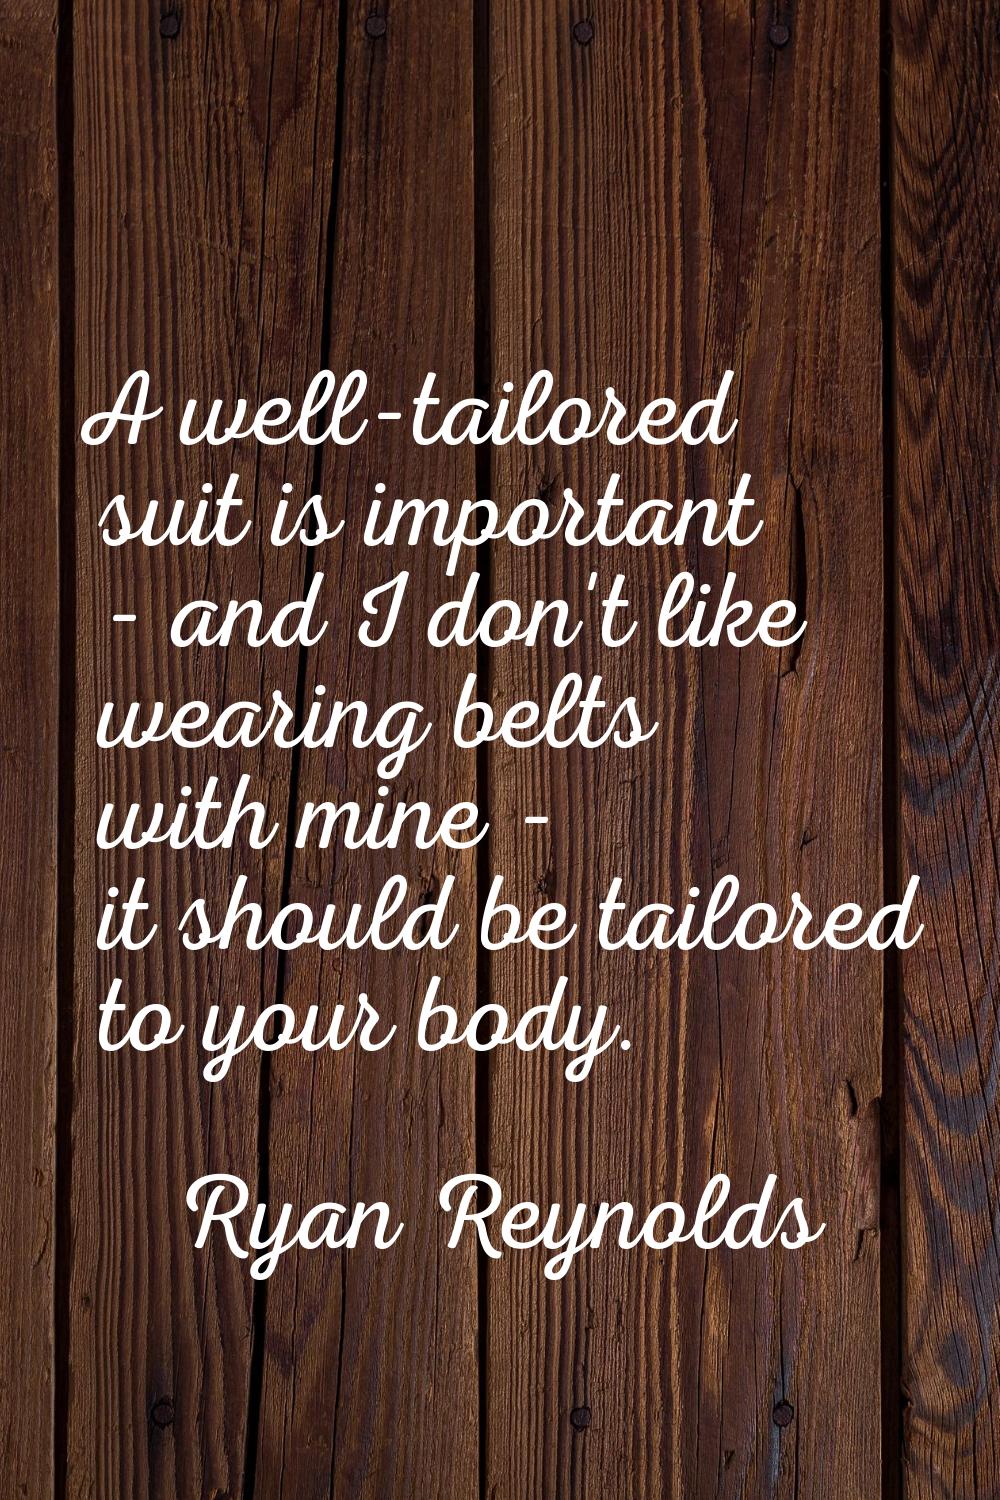 A well-tailored suit is important - and I don't like wearing belts with mine - it should be tailore